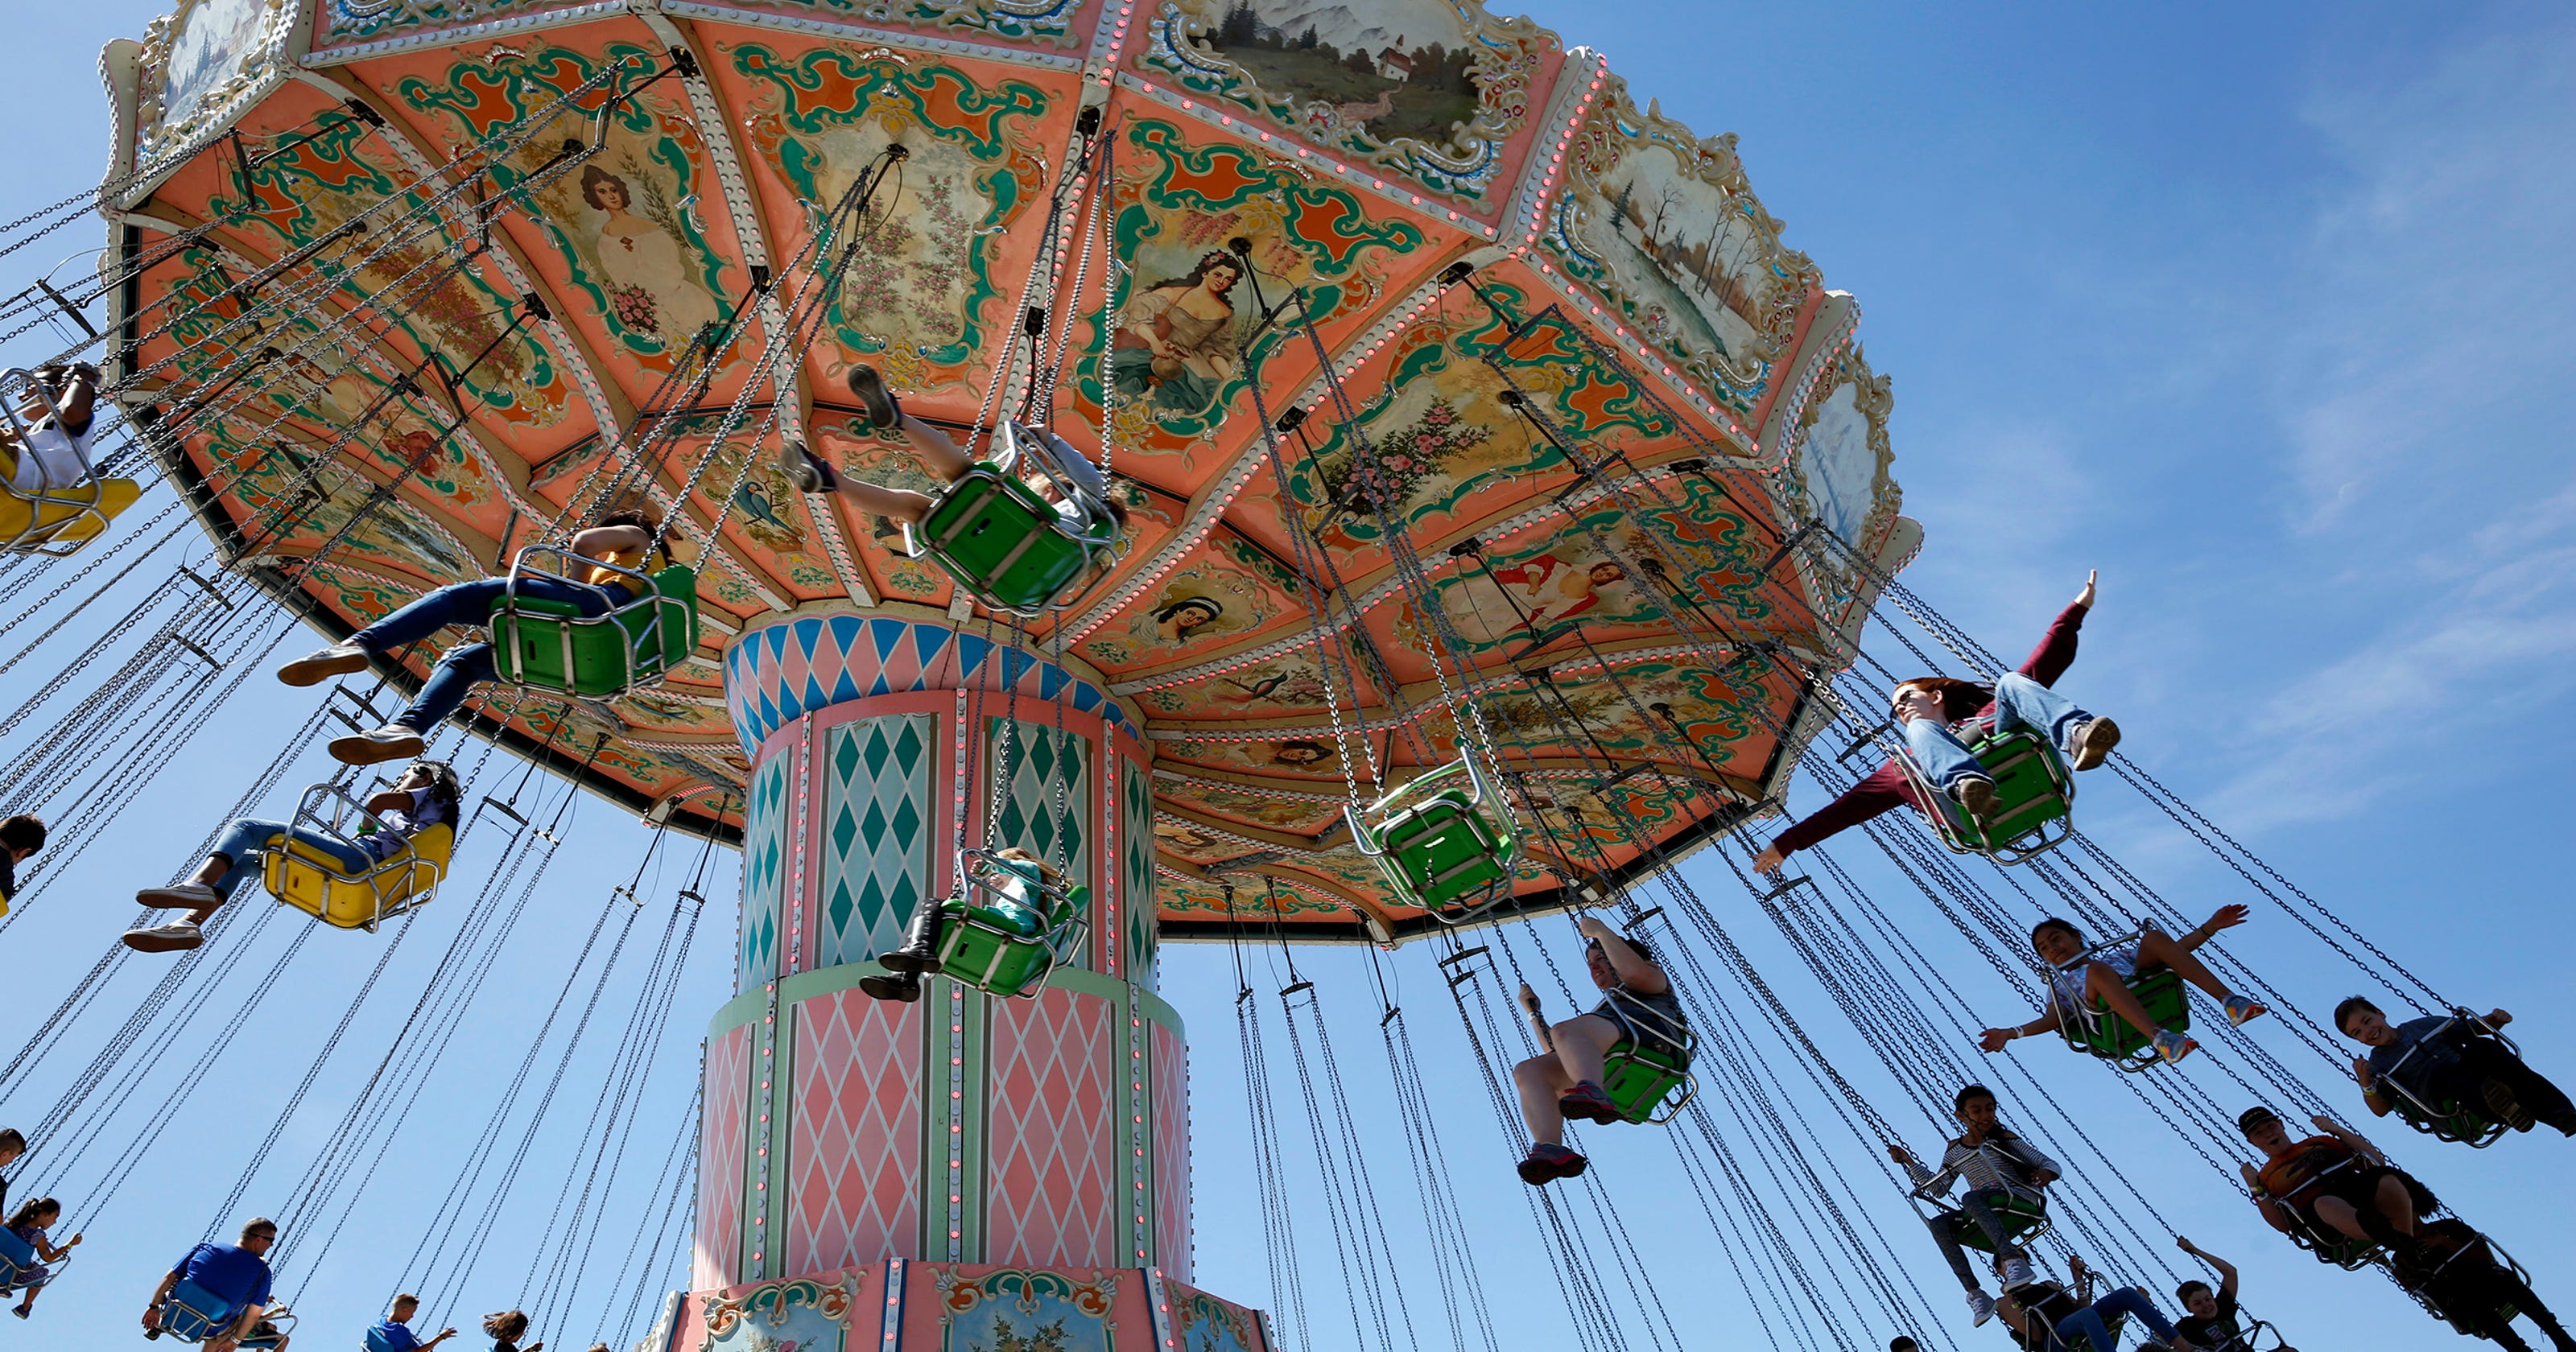 5 things not to miss at the Oregon State Fair in Salem